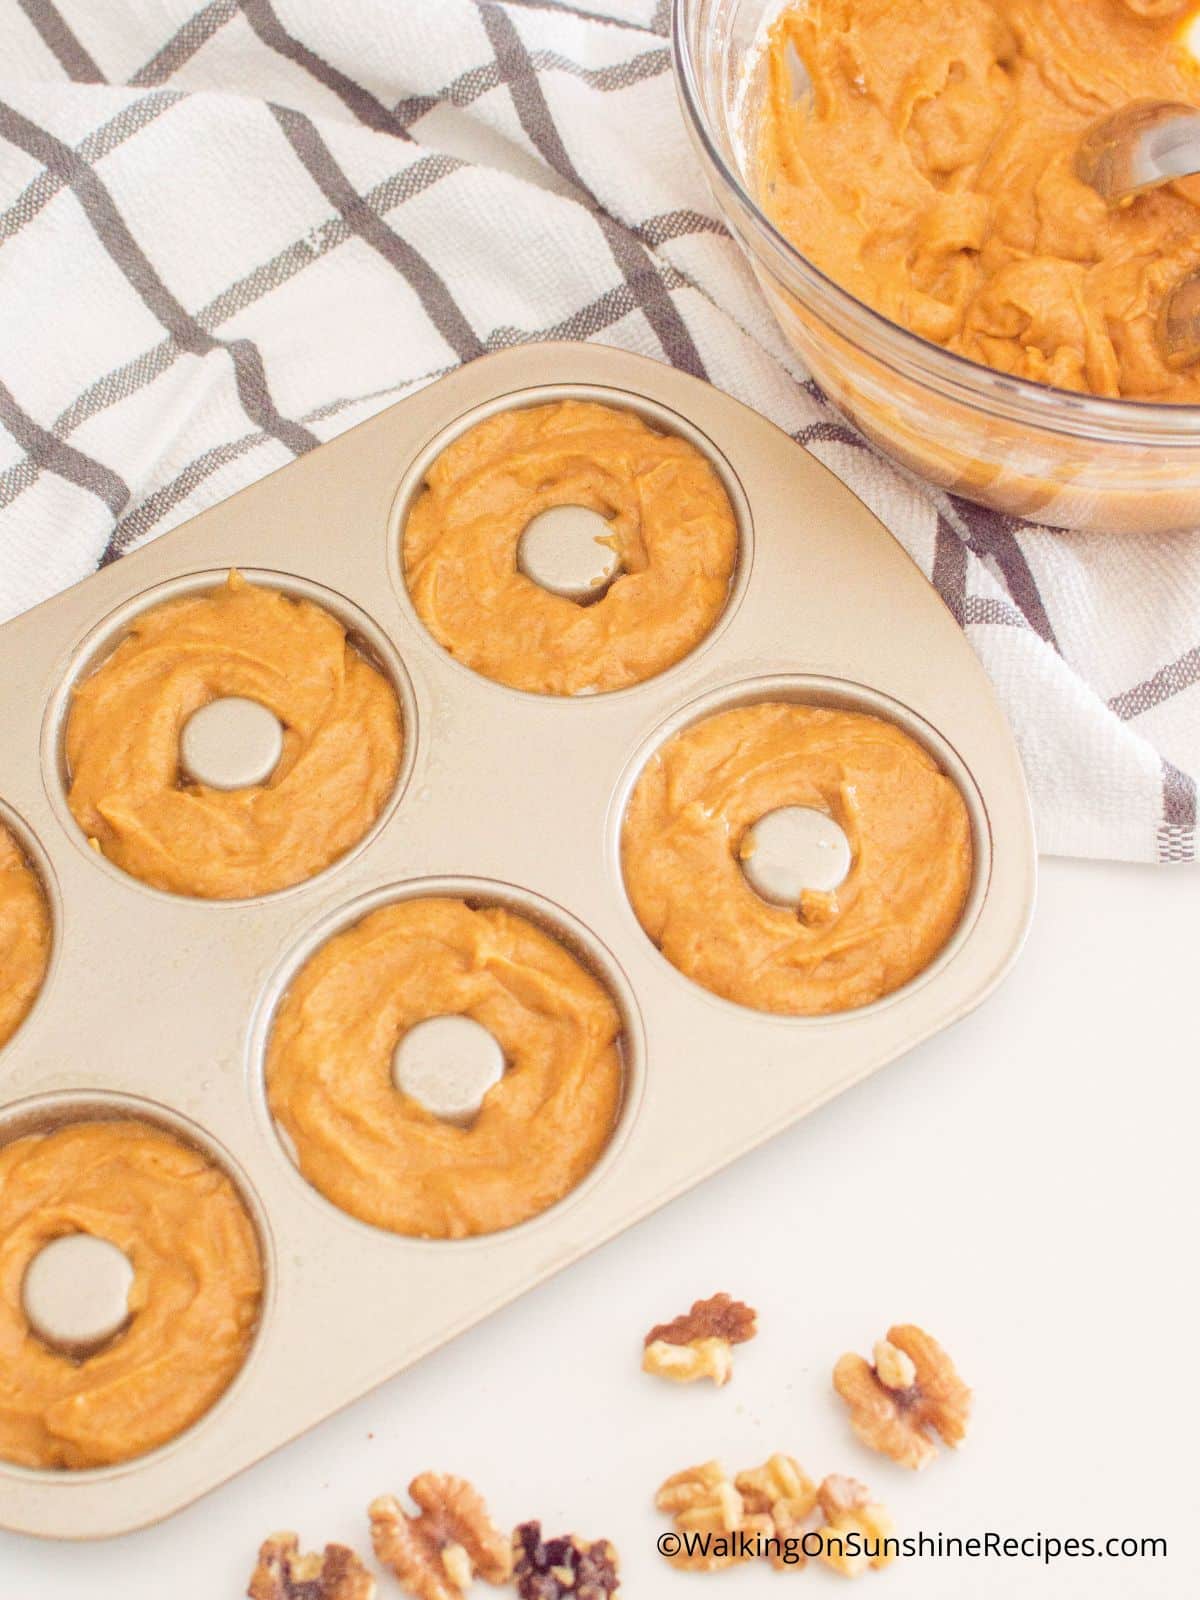 Fill the donut pan with the pumpkin donut batter.